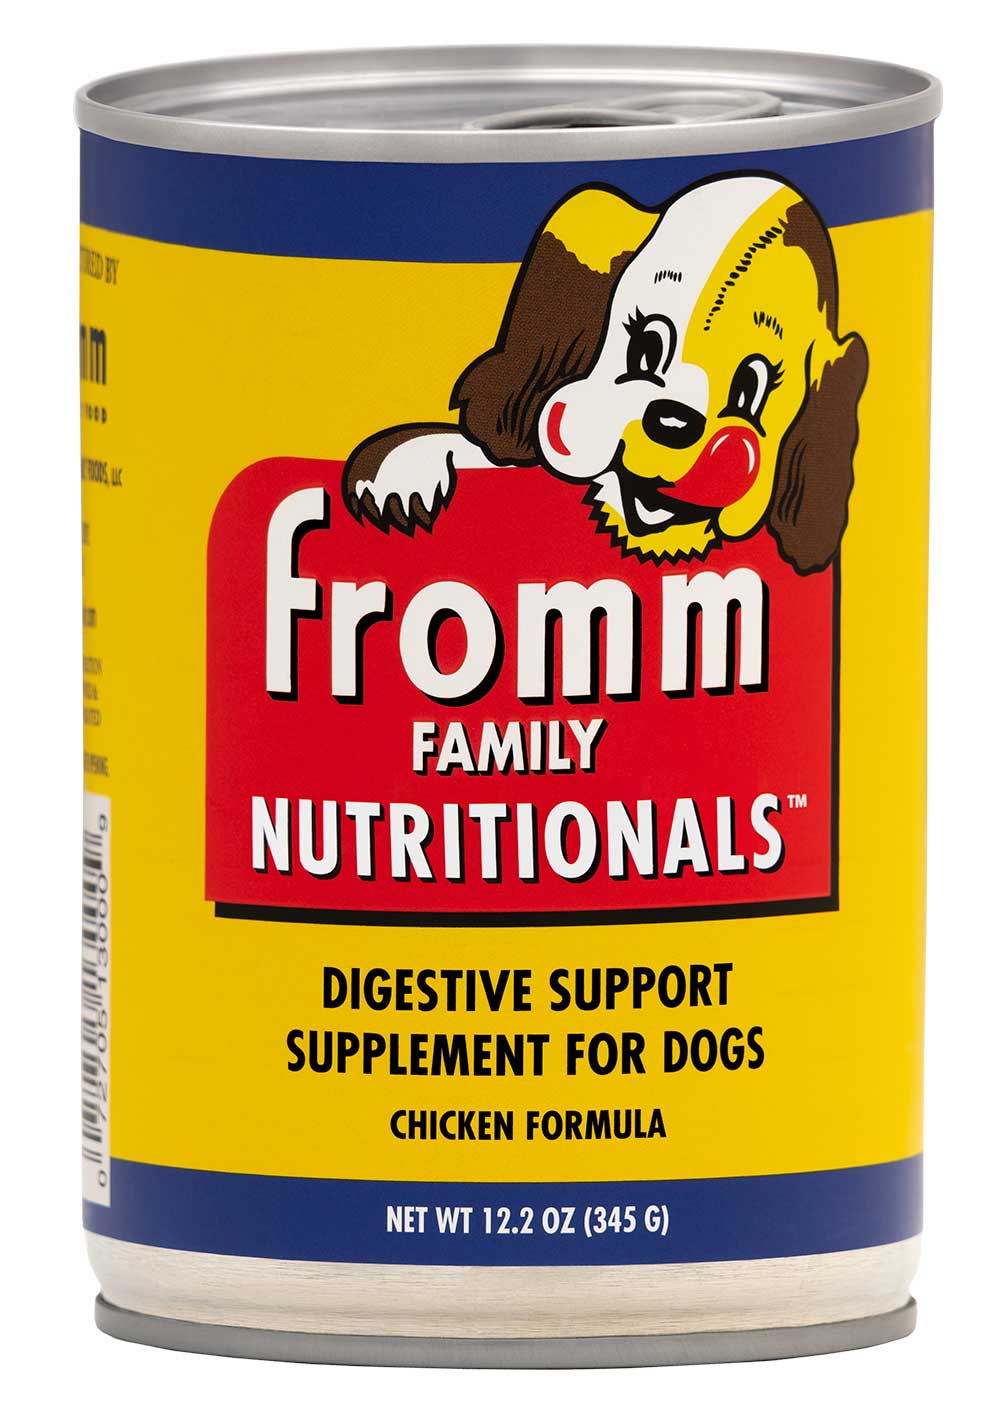 Fromm Family Nutritionals® Digestive Support Supplement Chicken Formula